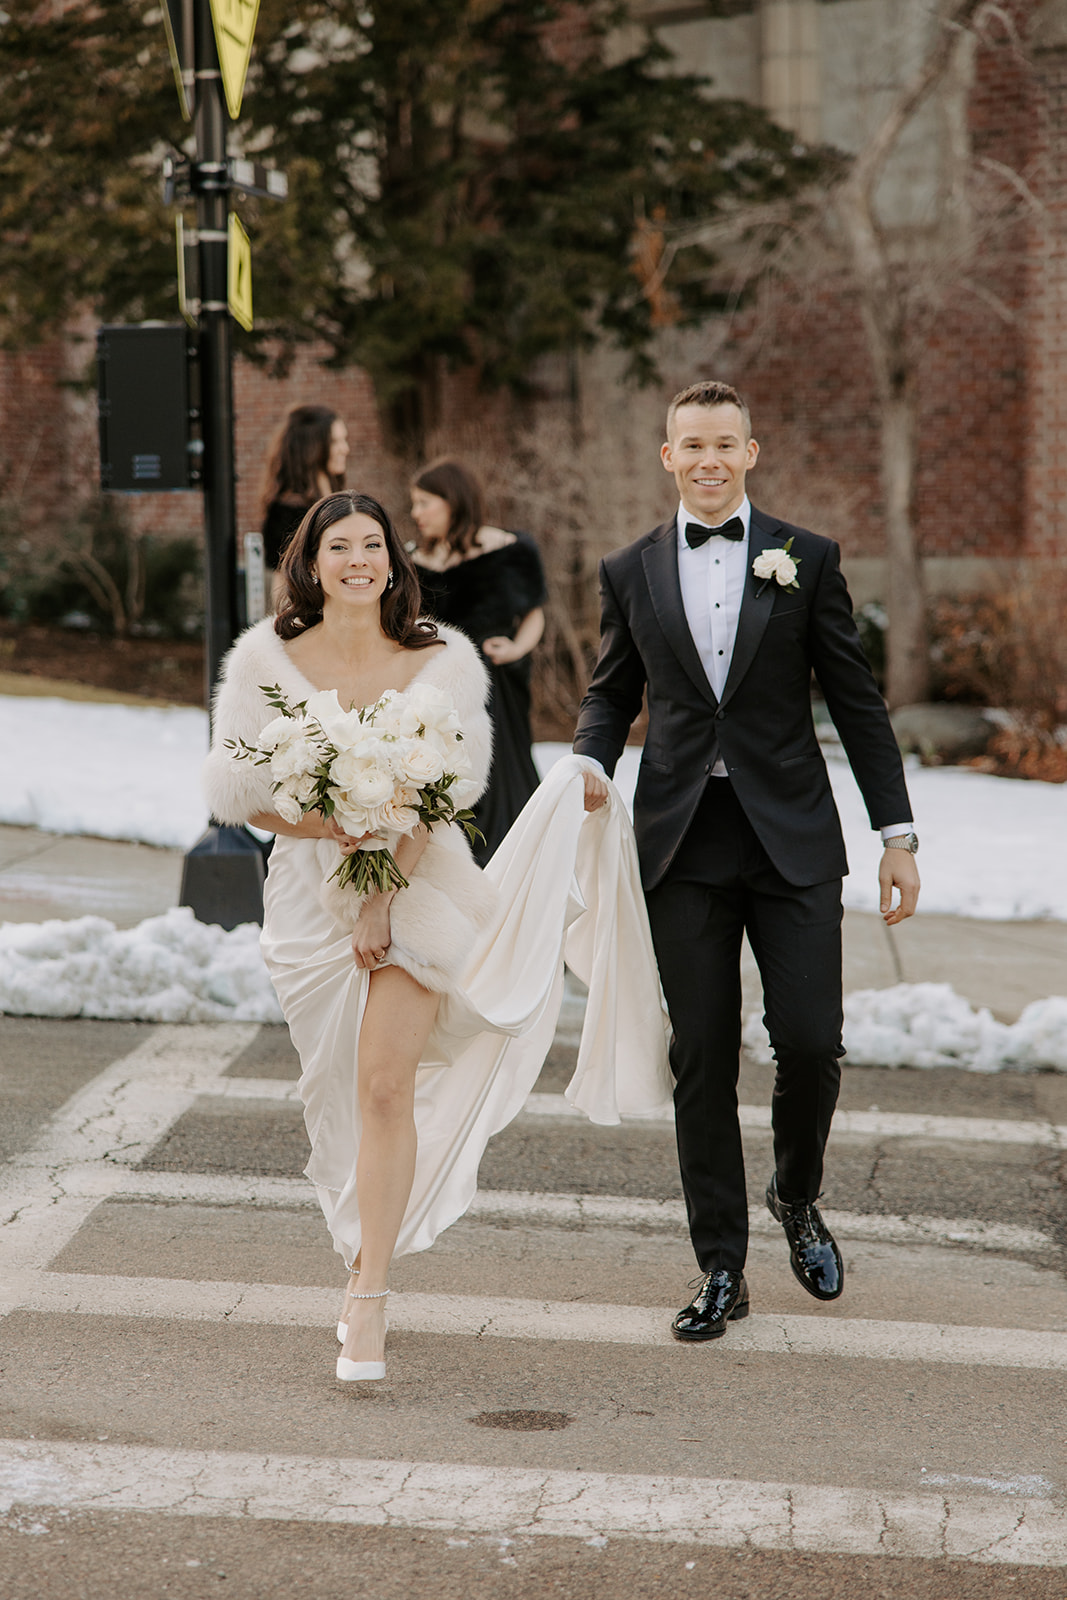 Groom holding bride's dress up while they walk across a crosswalk for their winter wedding.